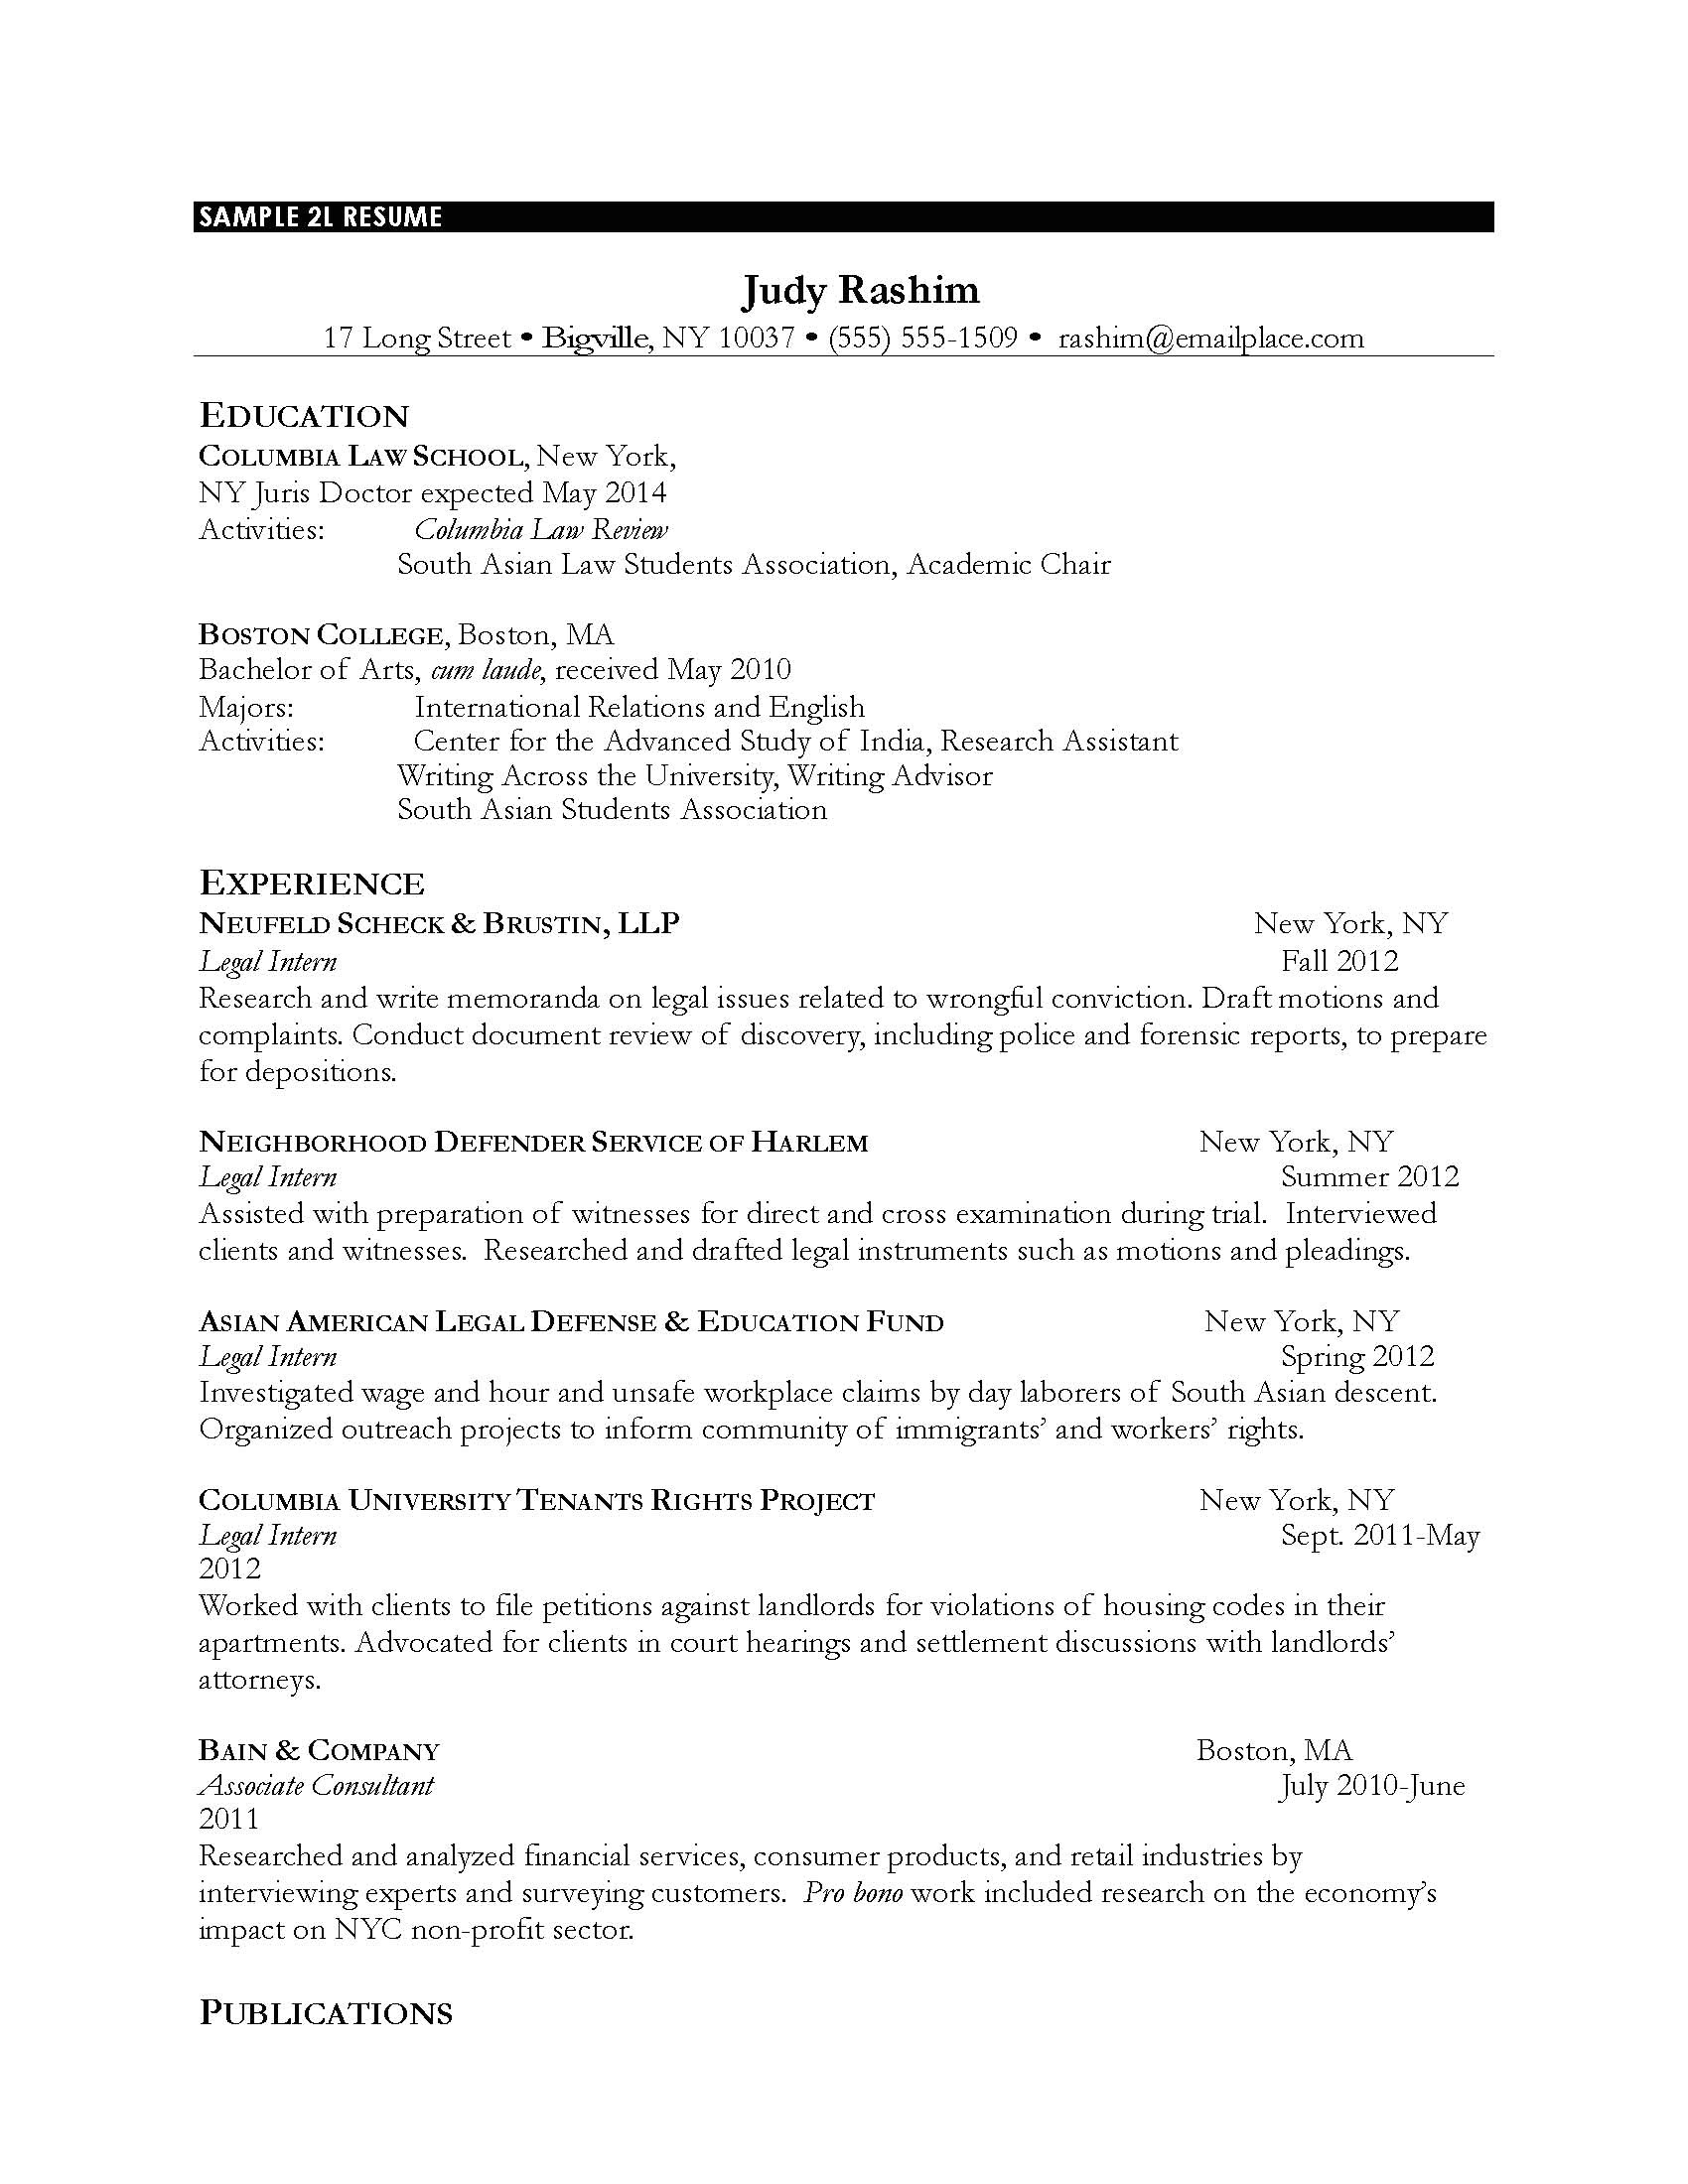 resume format for law students